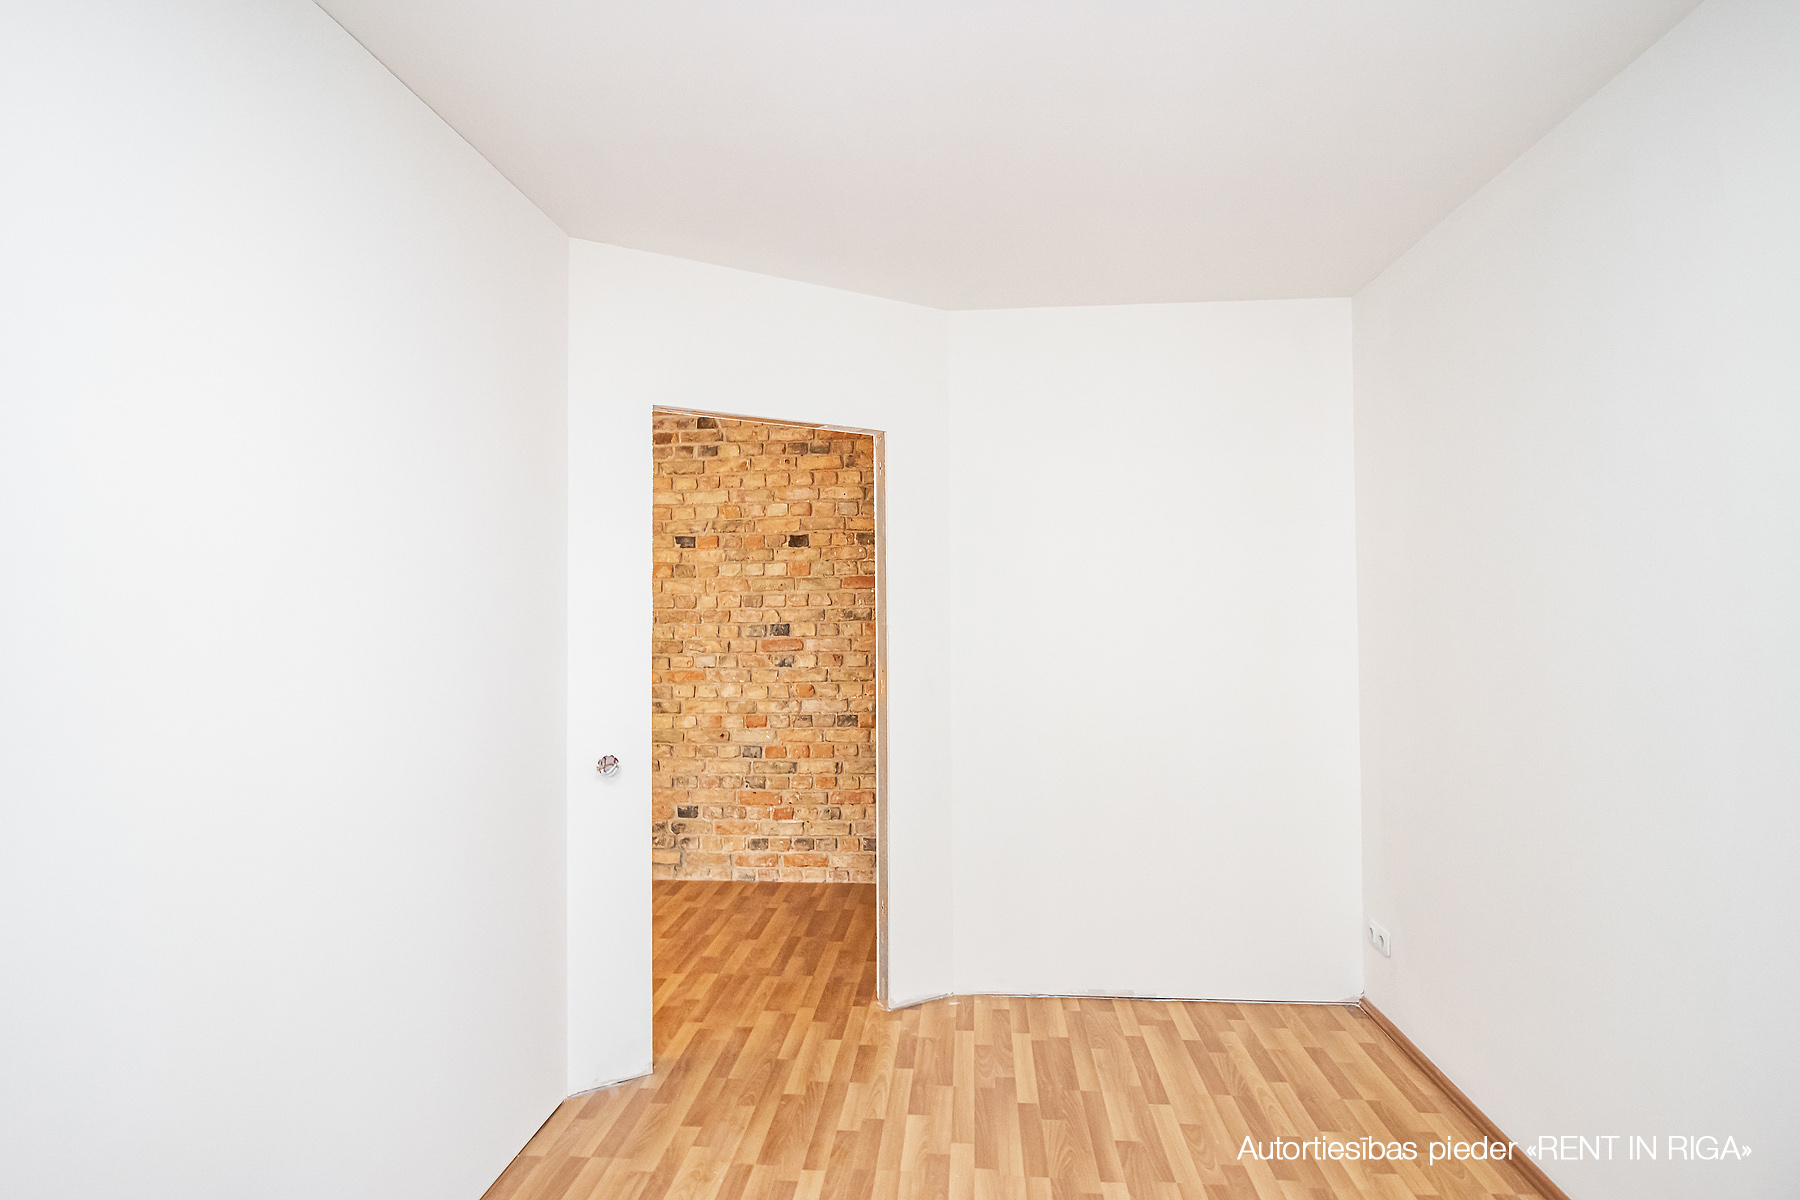 Apartment for sale, Jersikas street 21 - Image 1